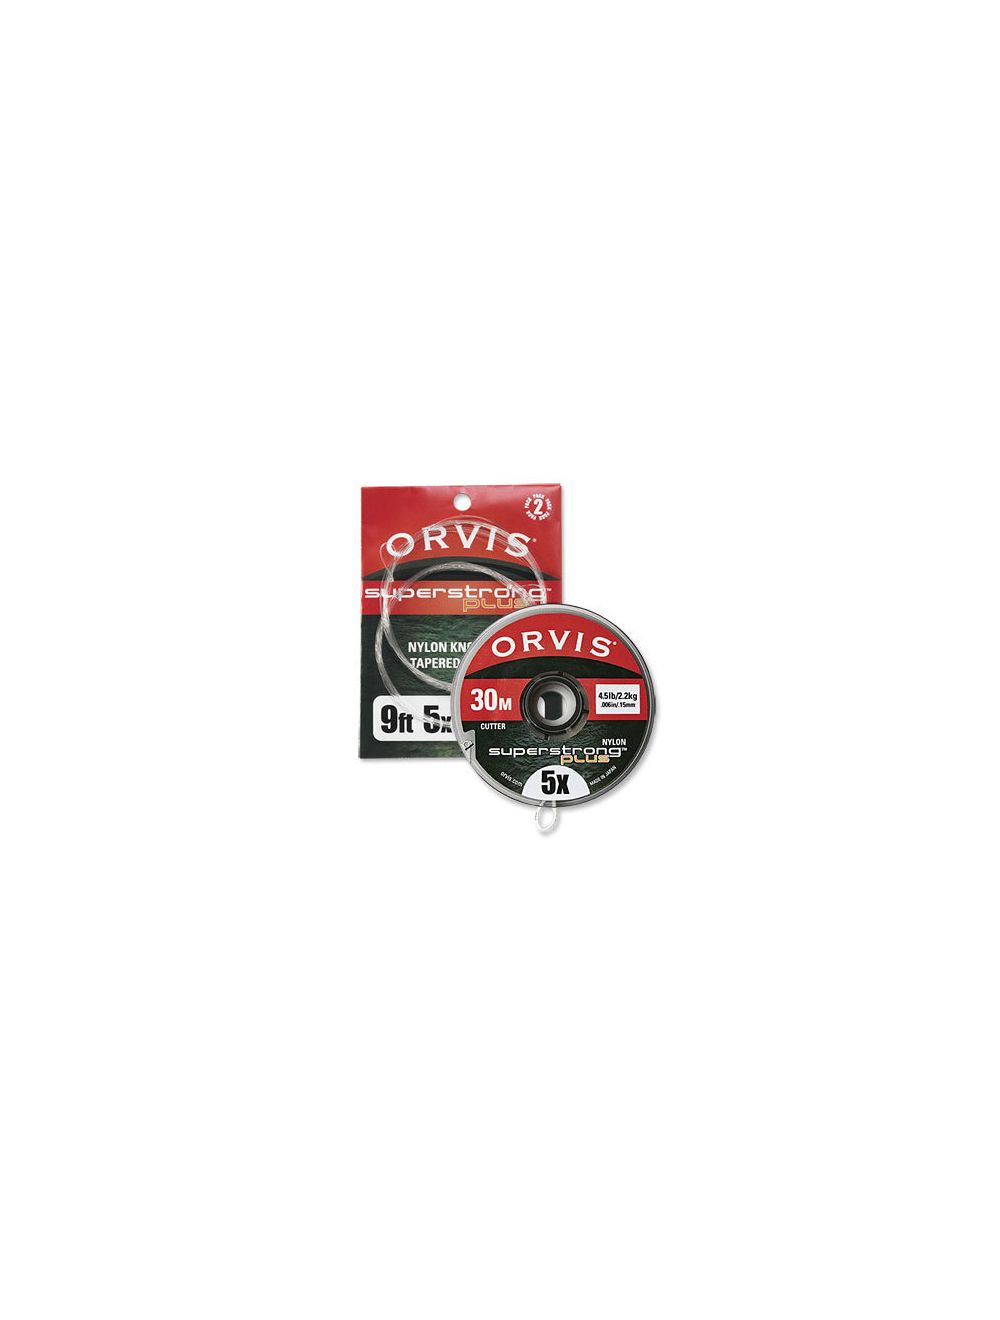 Orvis SuperStrong Plus Tippet 30m Spool